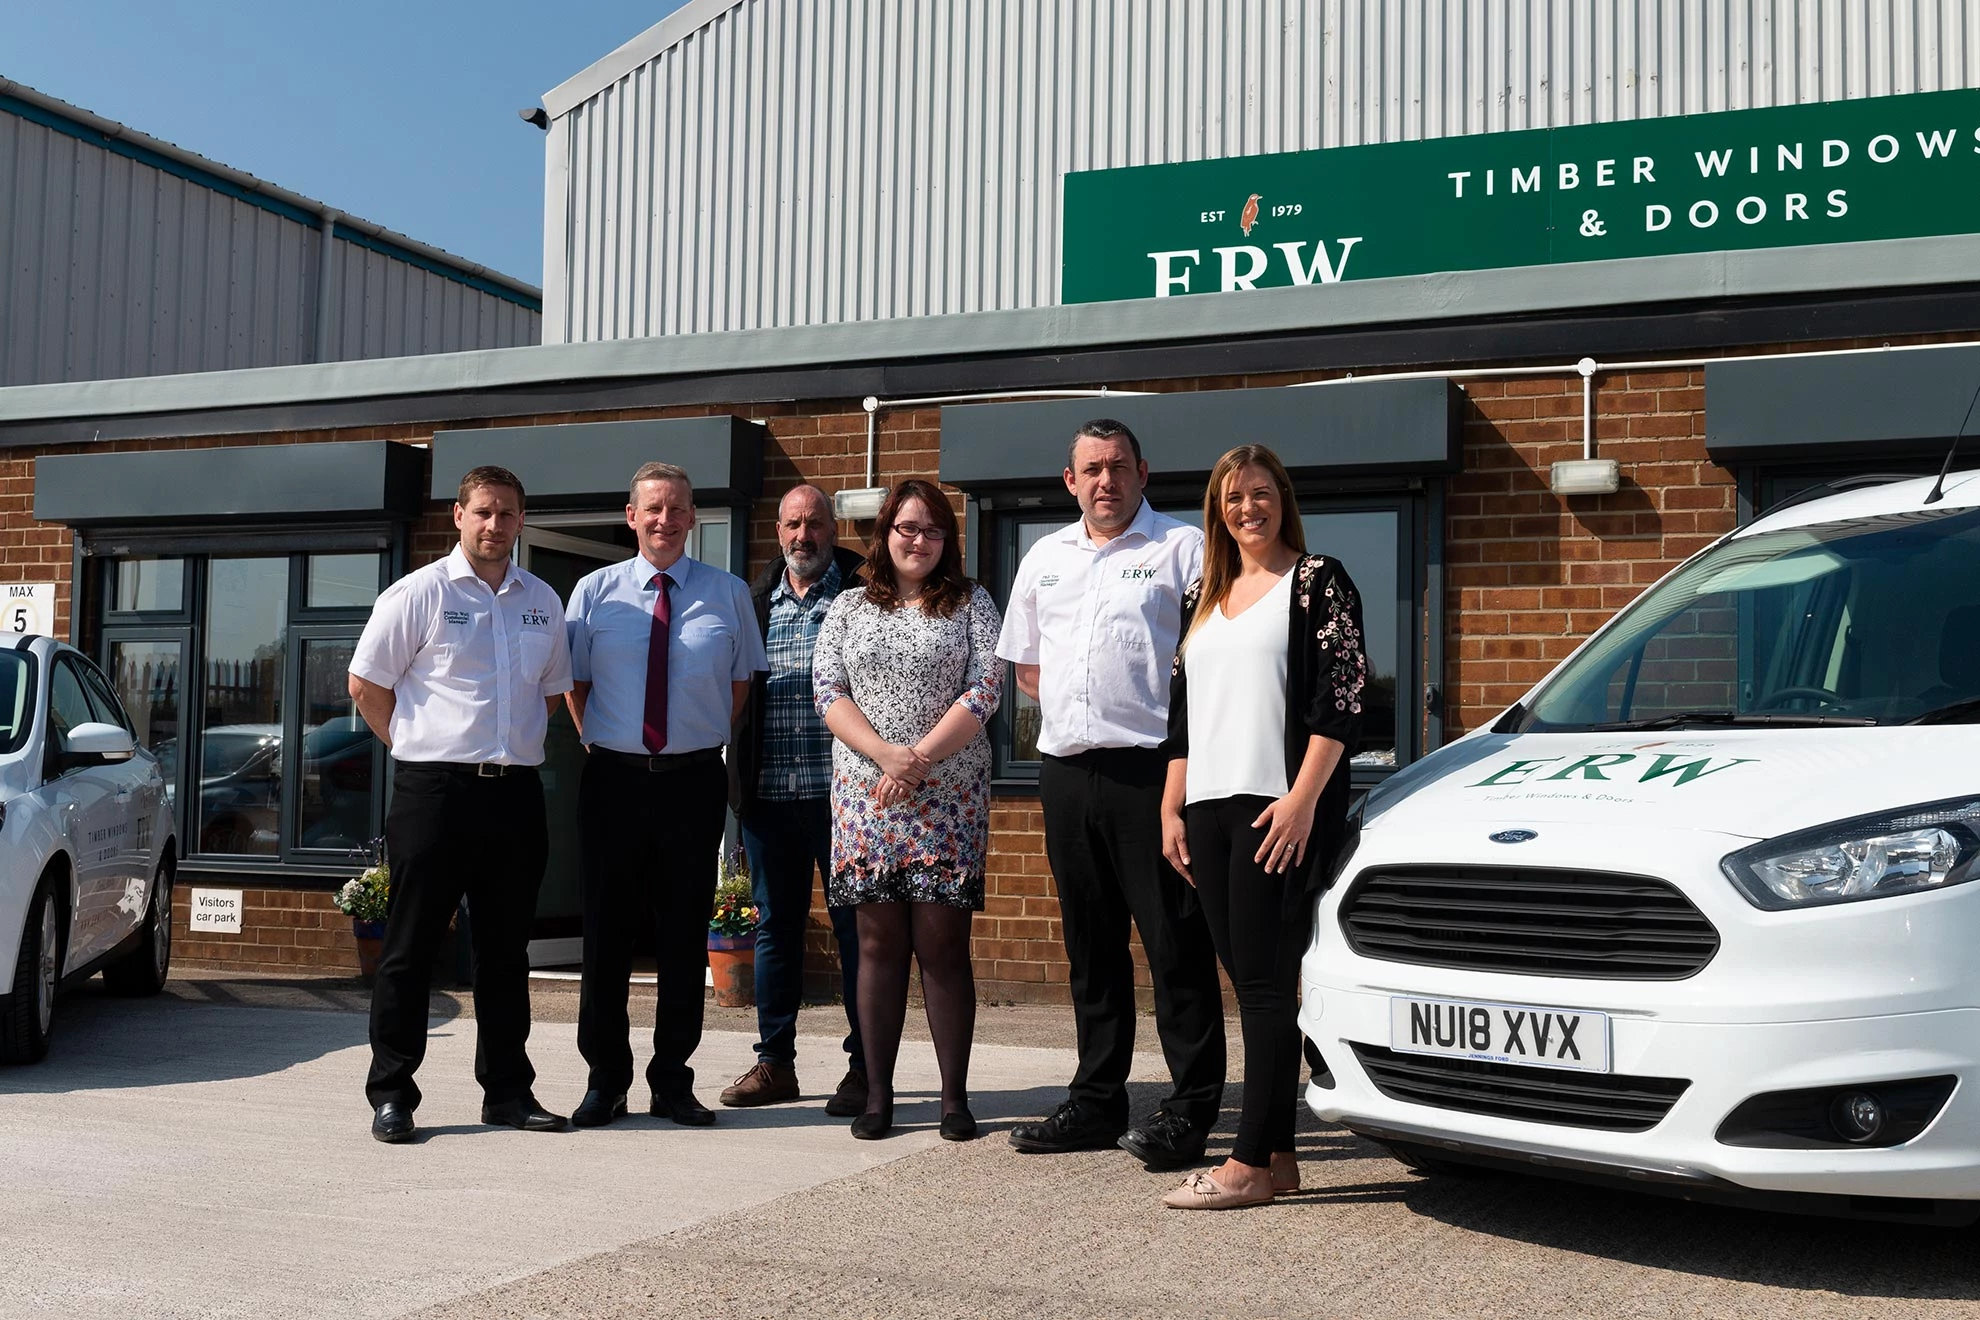 Phillip Wall (Commercial Manager), Lawrence Wall (MD), Andy Dawson (Installation Manager), Kirsty Semark (Customer Service Supervisor) and Helen Wood (Marketing and Accounts Manager) 